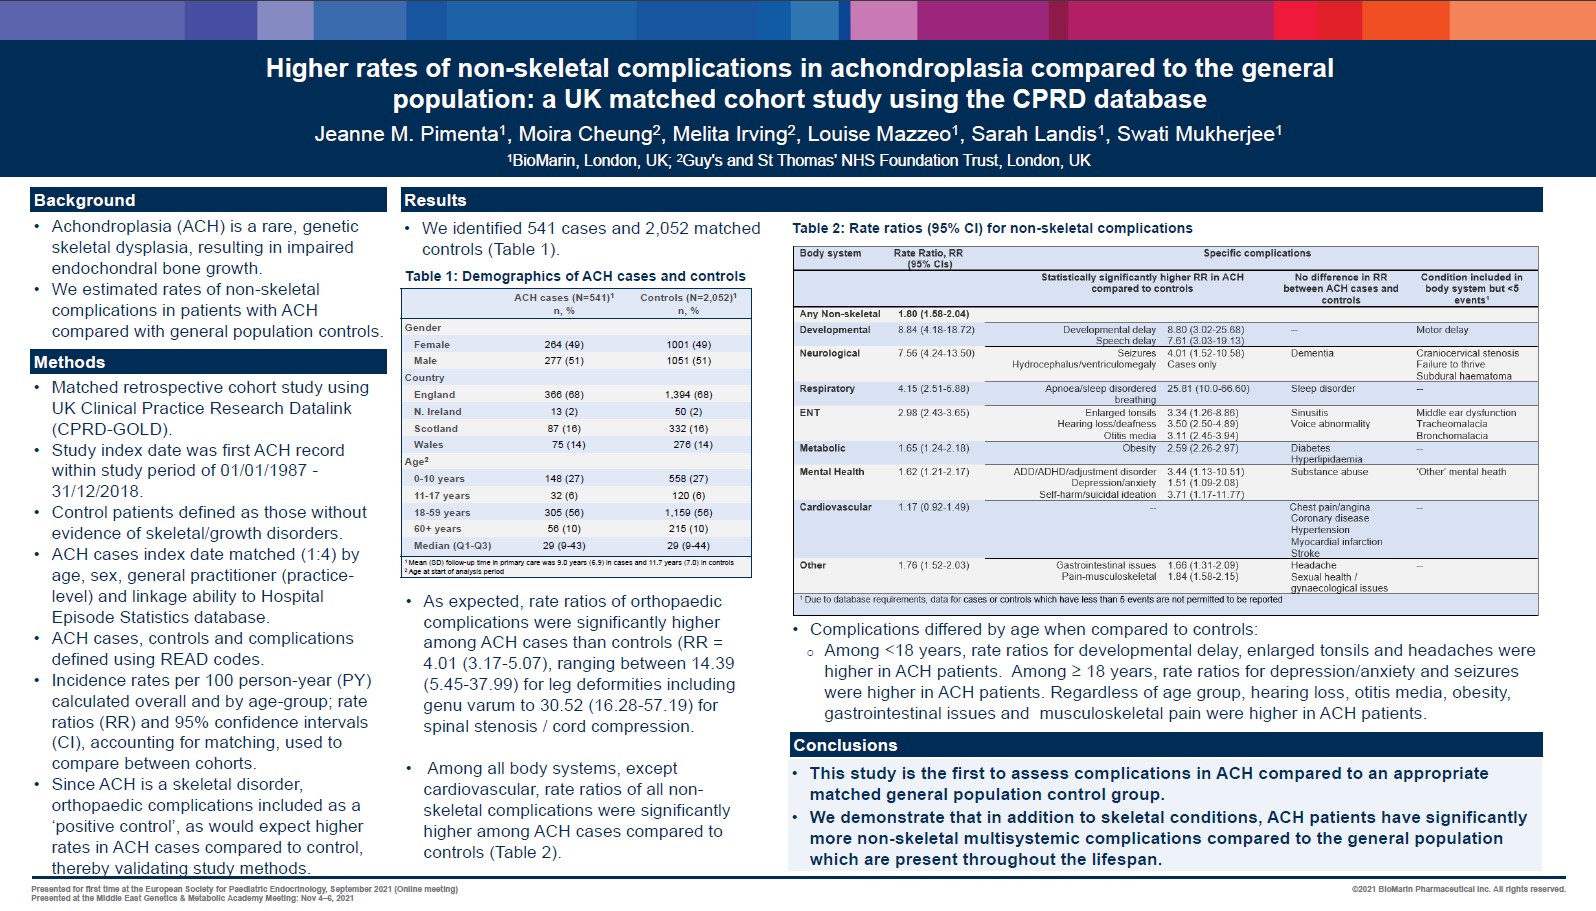 Higher rates of non non-skeletal complications in achondroplasia compared to the general population: a UK matched cohort study using the CPRD database